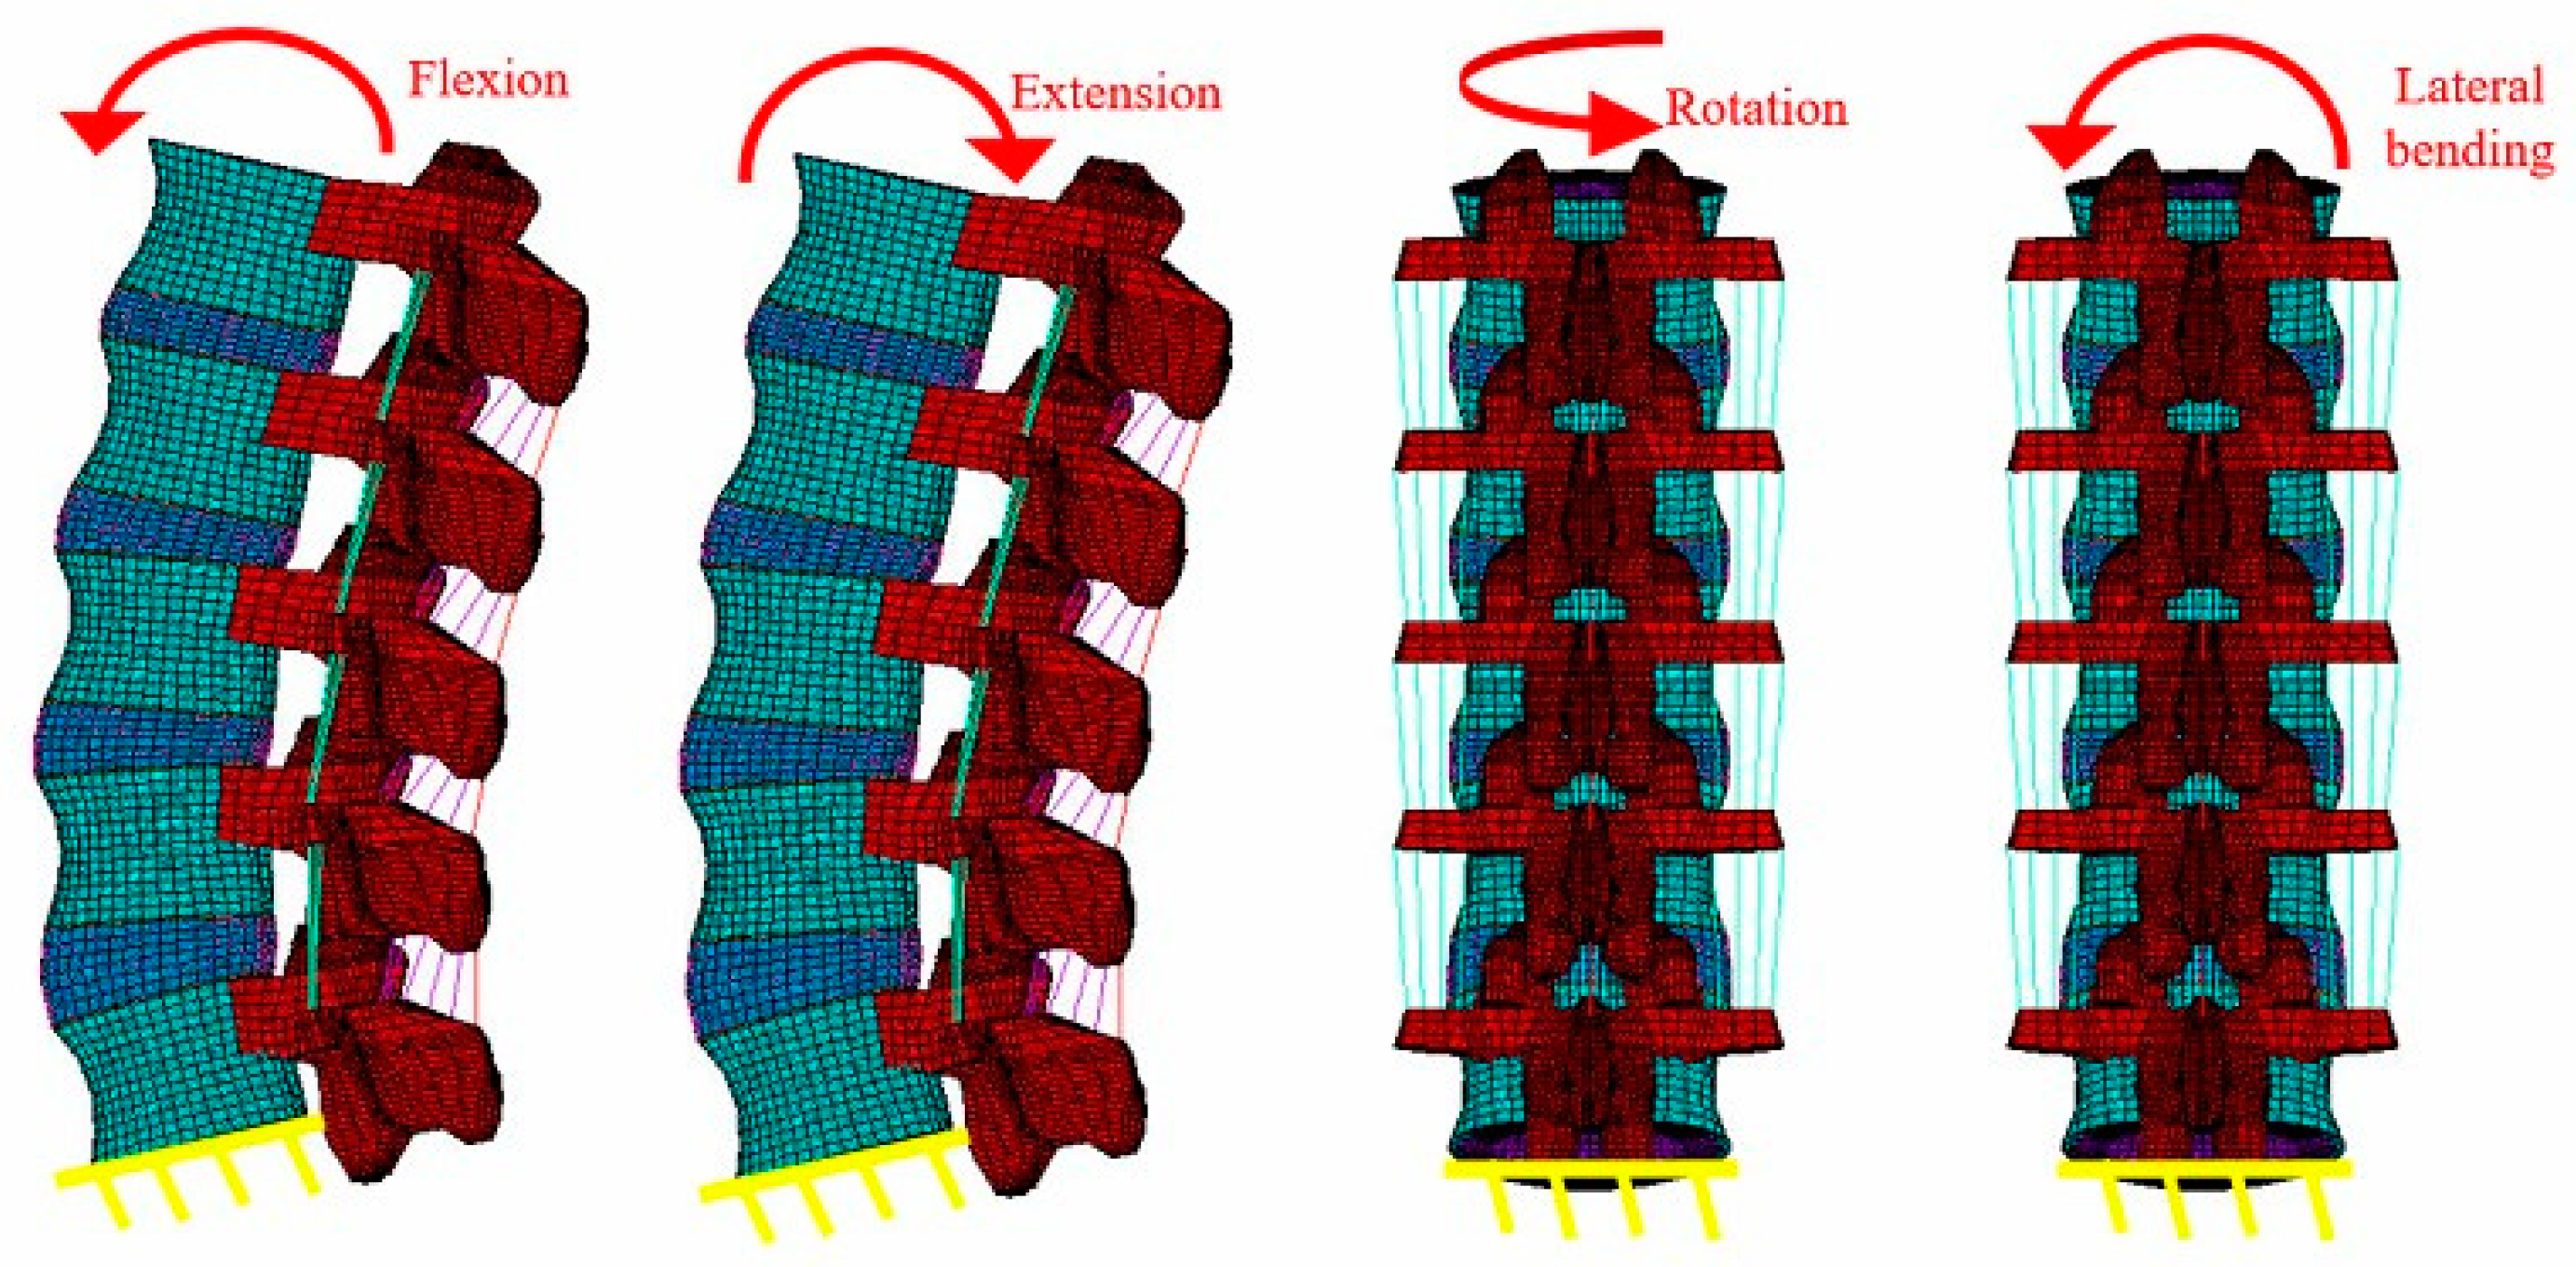 DEVELOPMENT AND VALIDATION OF A FINITE ELEMENT MODEL OF THE LUMBAR SEGMENT  L4-L5-S1 FOR BIOMECHANICAL STUDY OF THE SPINE - Latin American University  Presses Rights Catalog